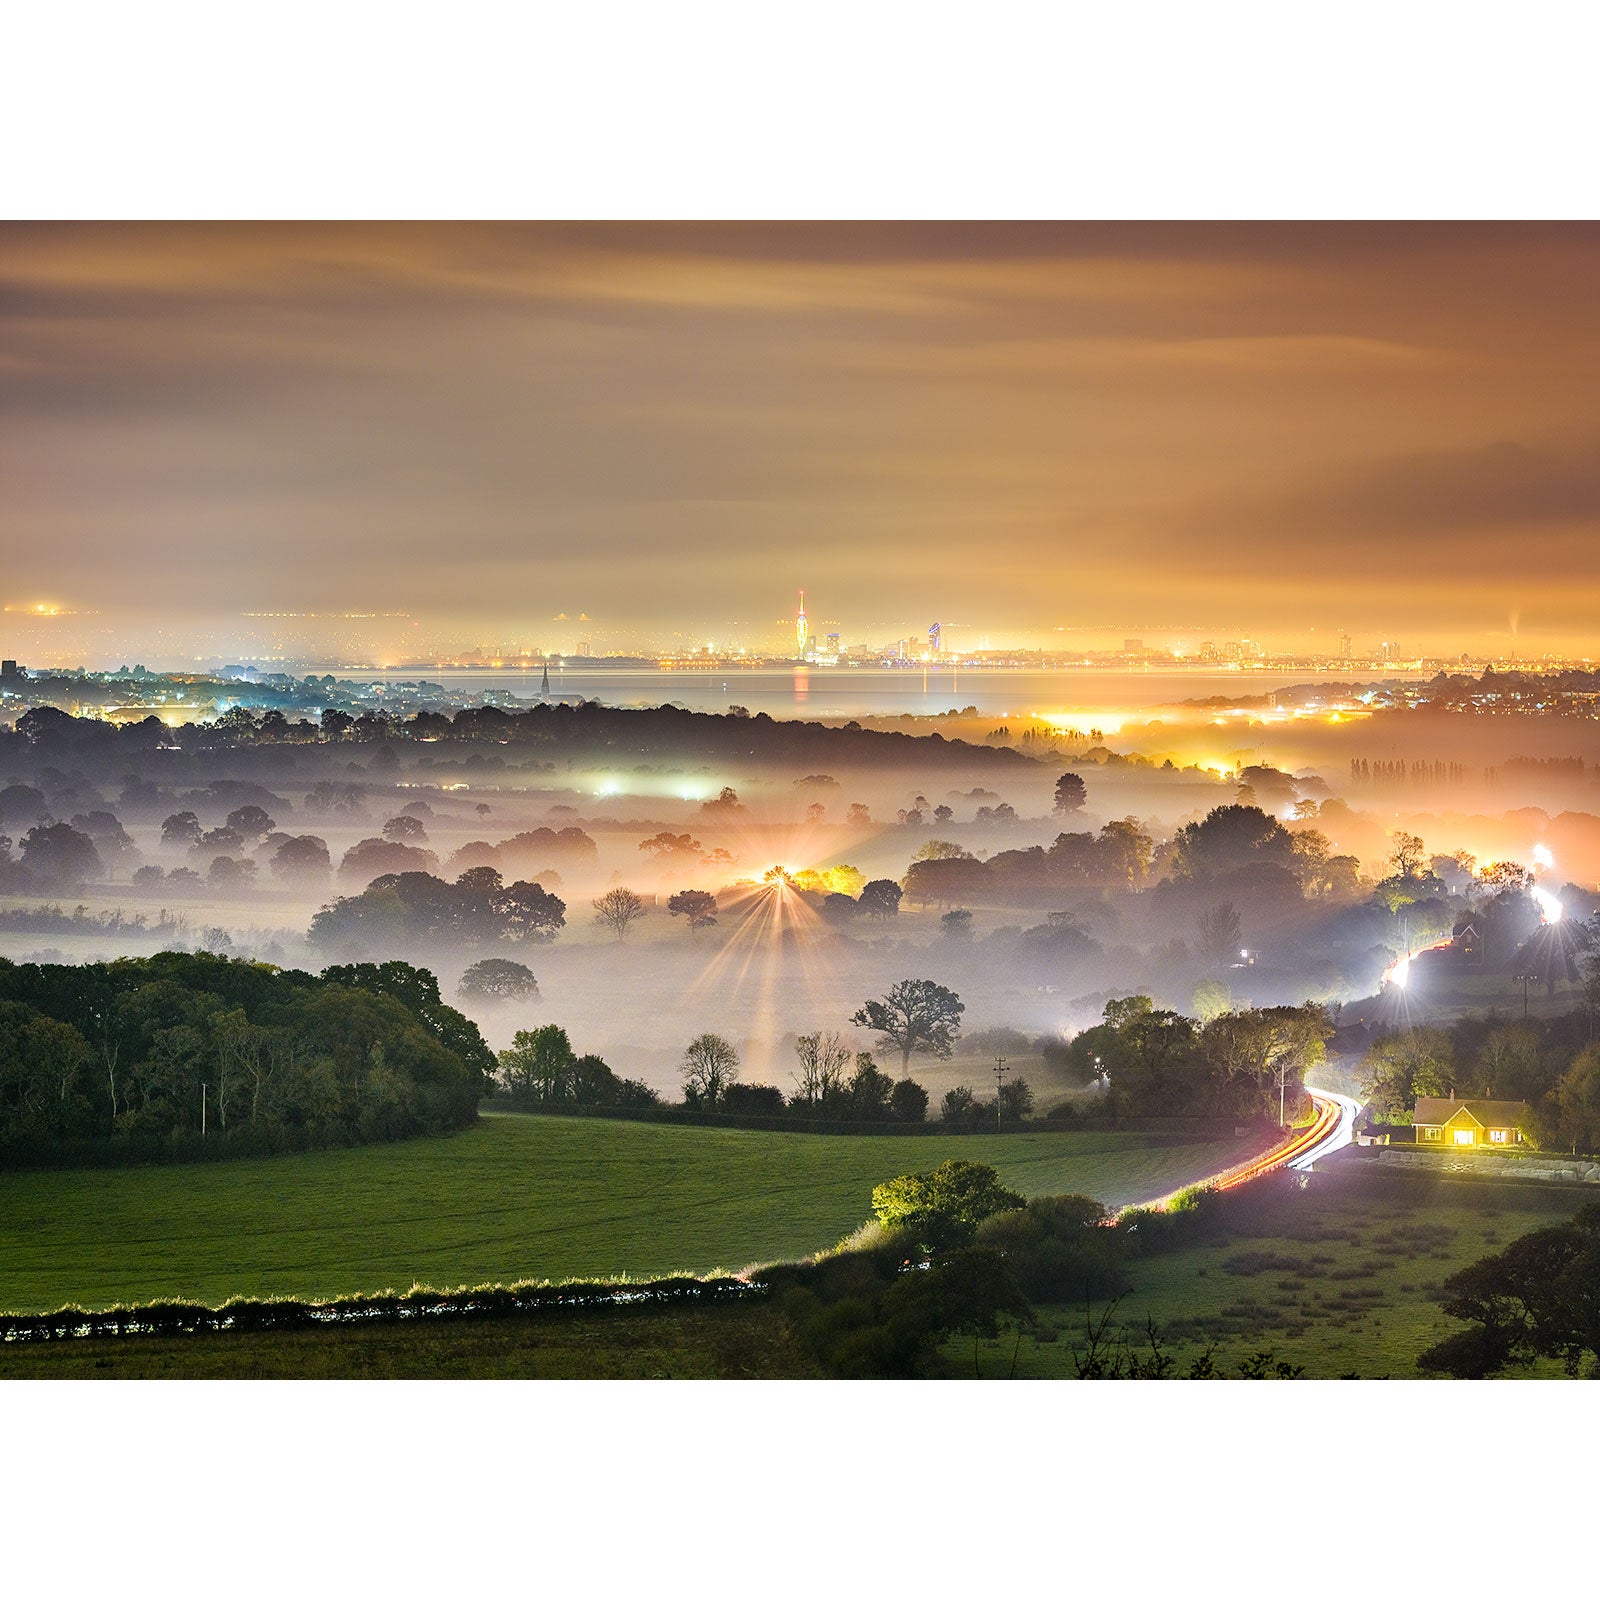 A nocturnal landscape blanketed in Misty Evening with twinkling city lights on the Isle of Wight in the distance and a winding road illuminated by a vehicle's passing, captured by Available Light Photography.